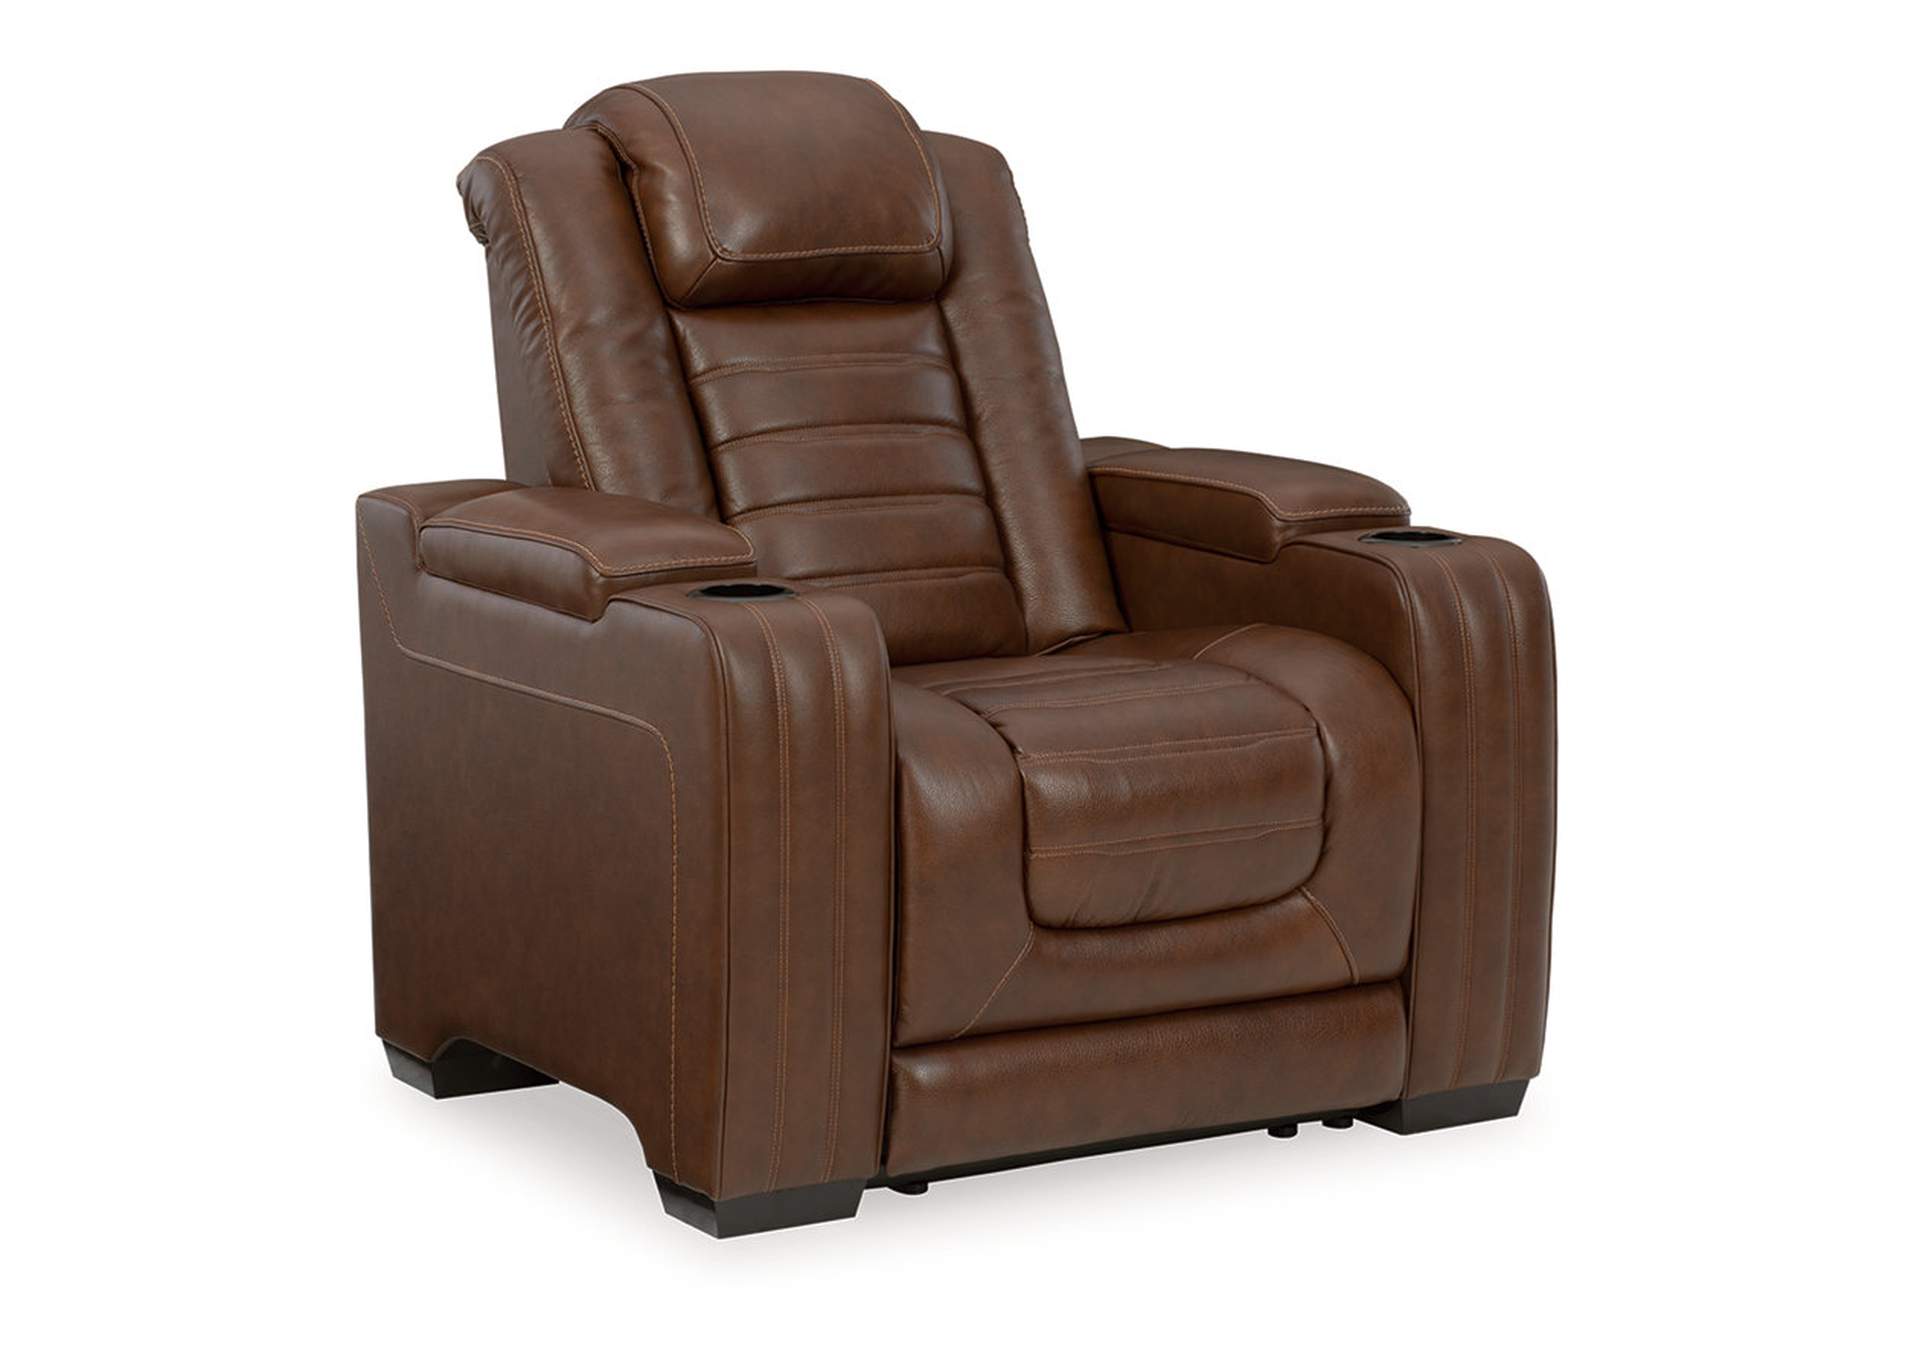 Backtrack Power Recliner,Signature Design By Ashley